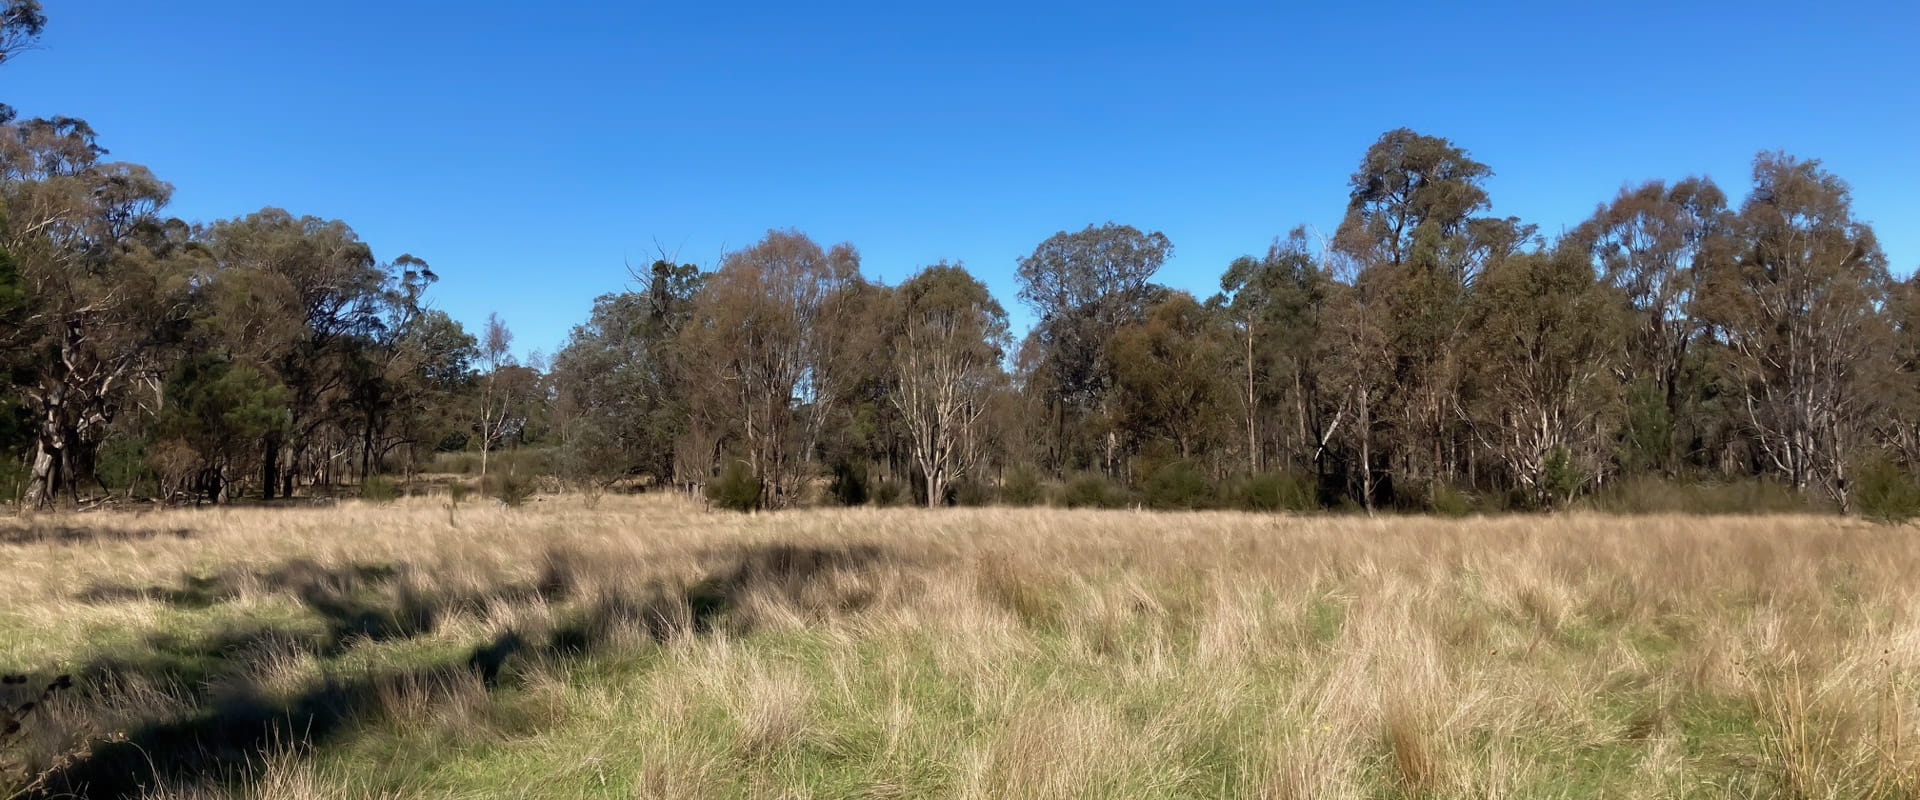 A grassy open field surrounded by tall eucalypts.